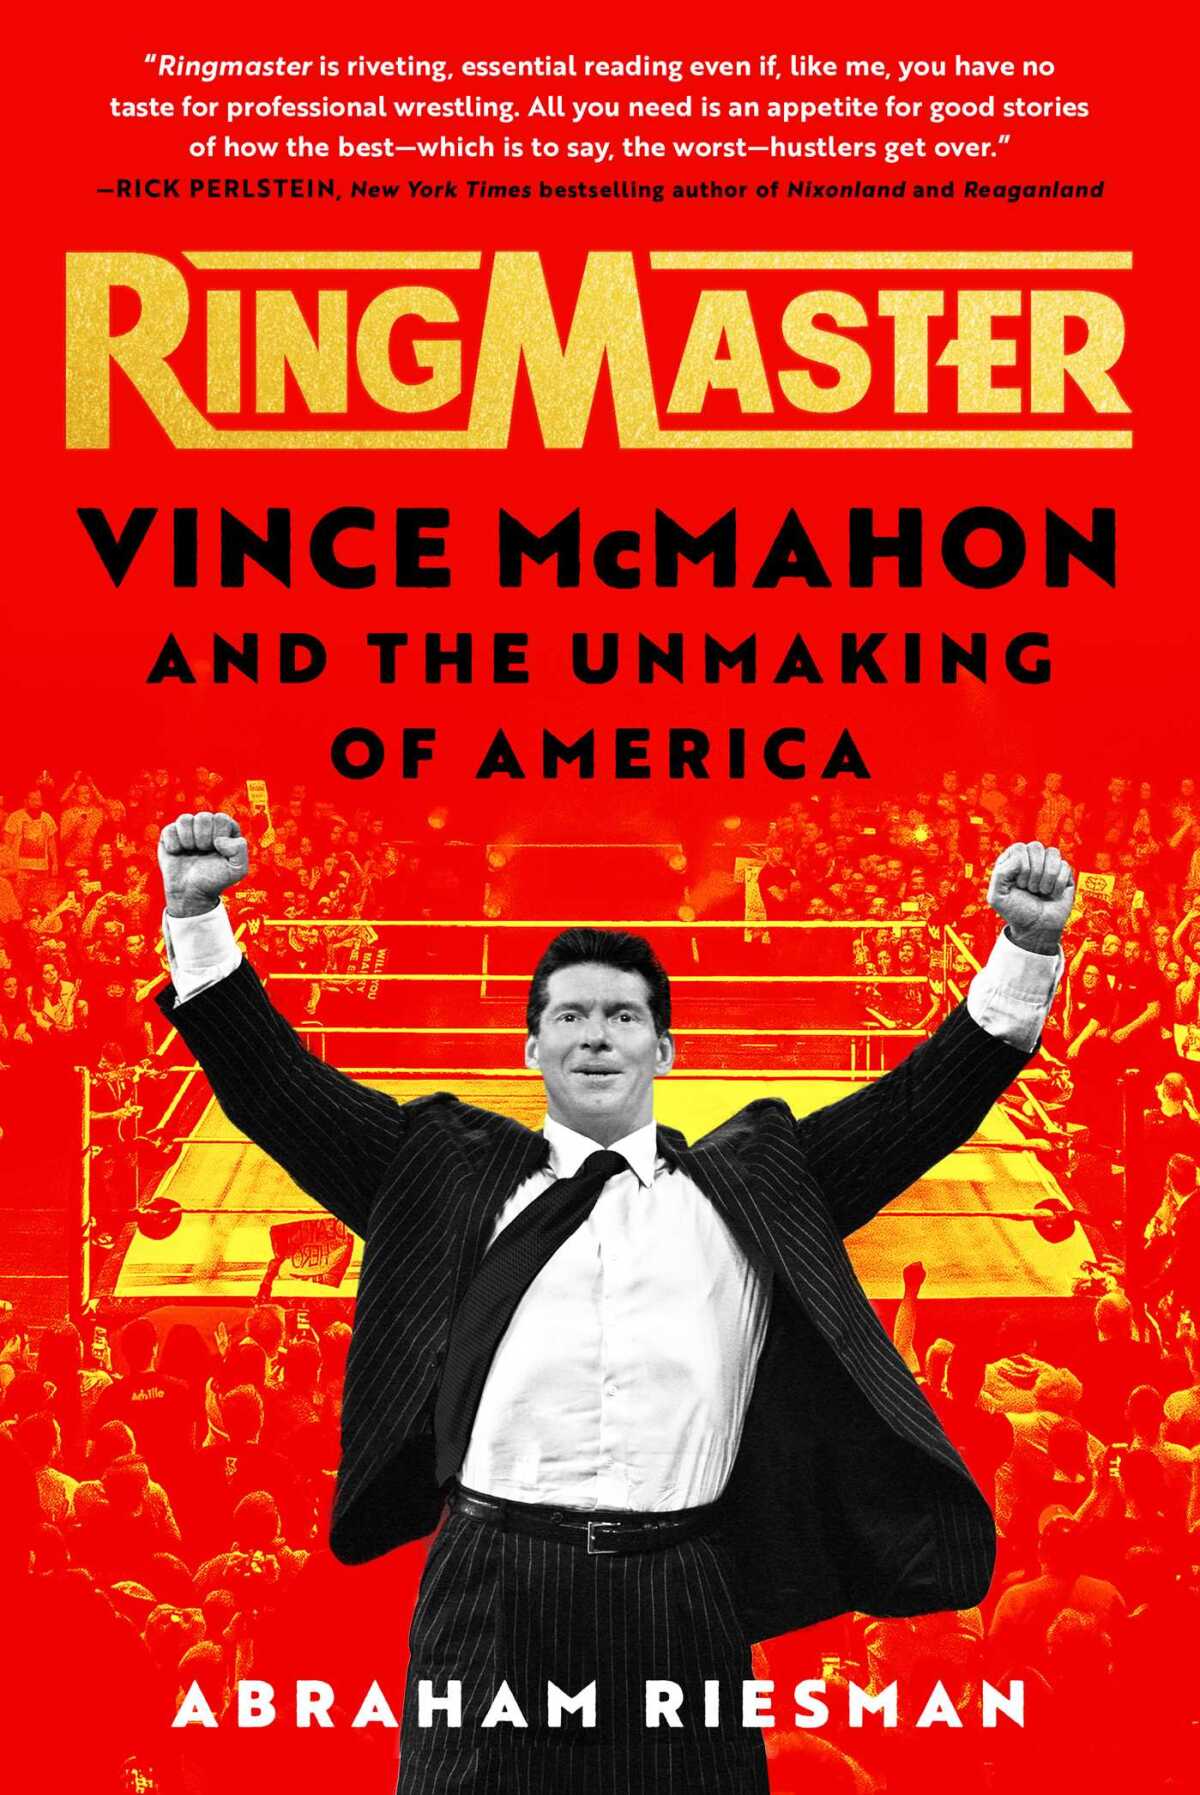 'Ringmaster: Vince McMahon and the Unmaking of America' by Abraham Josephine Riesman